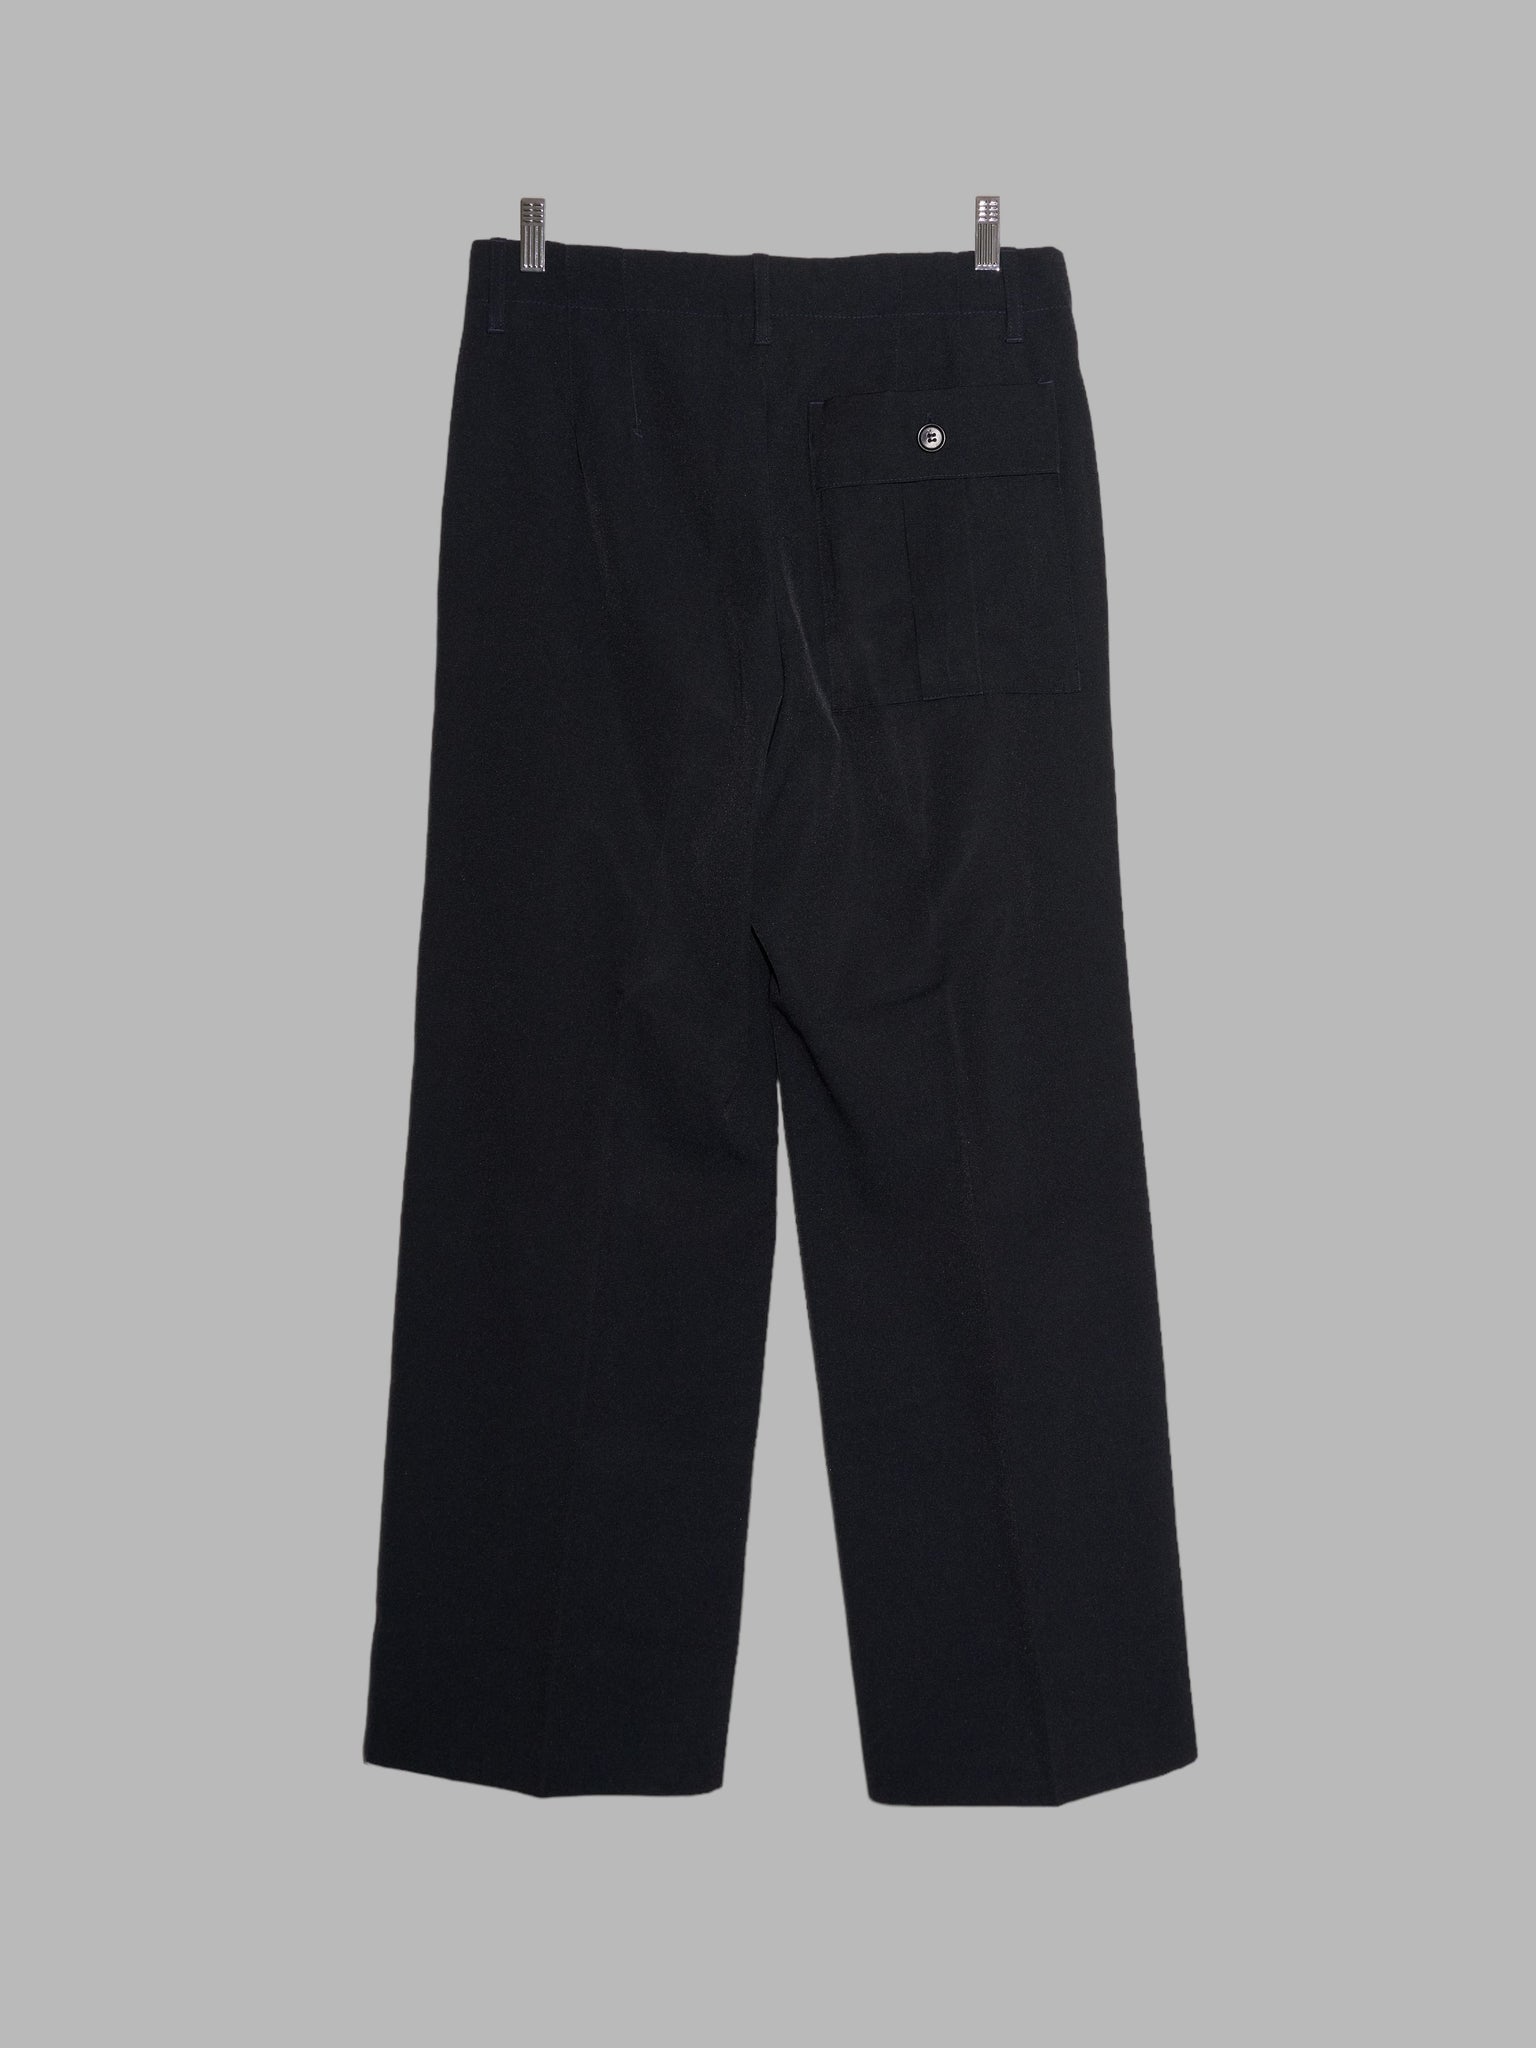 Dirk Bikkembergs black poly-cotton trousers with back cargo pocket - M S